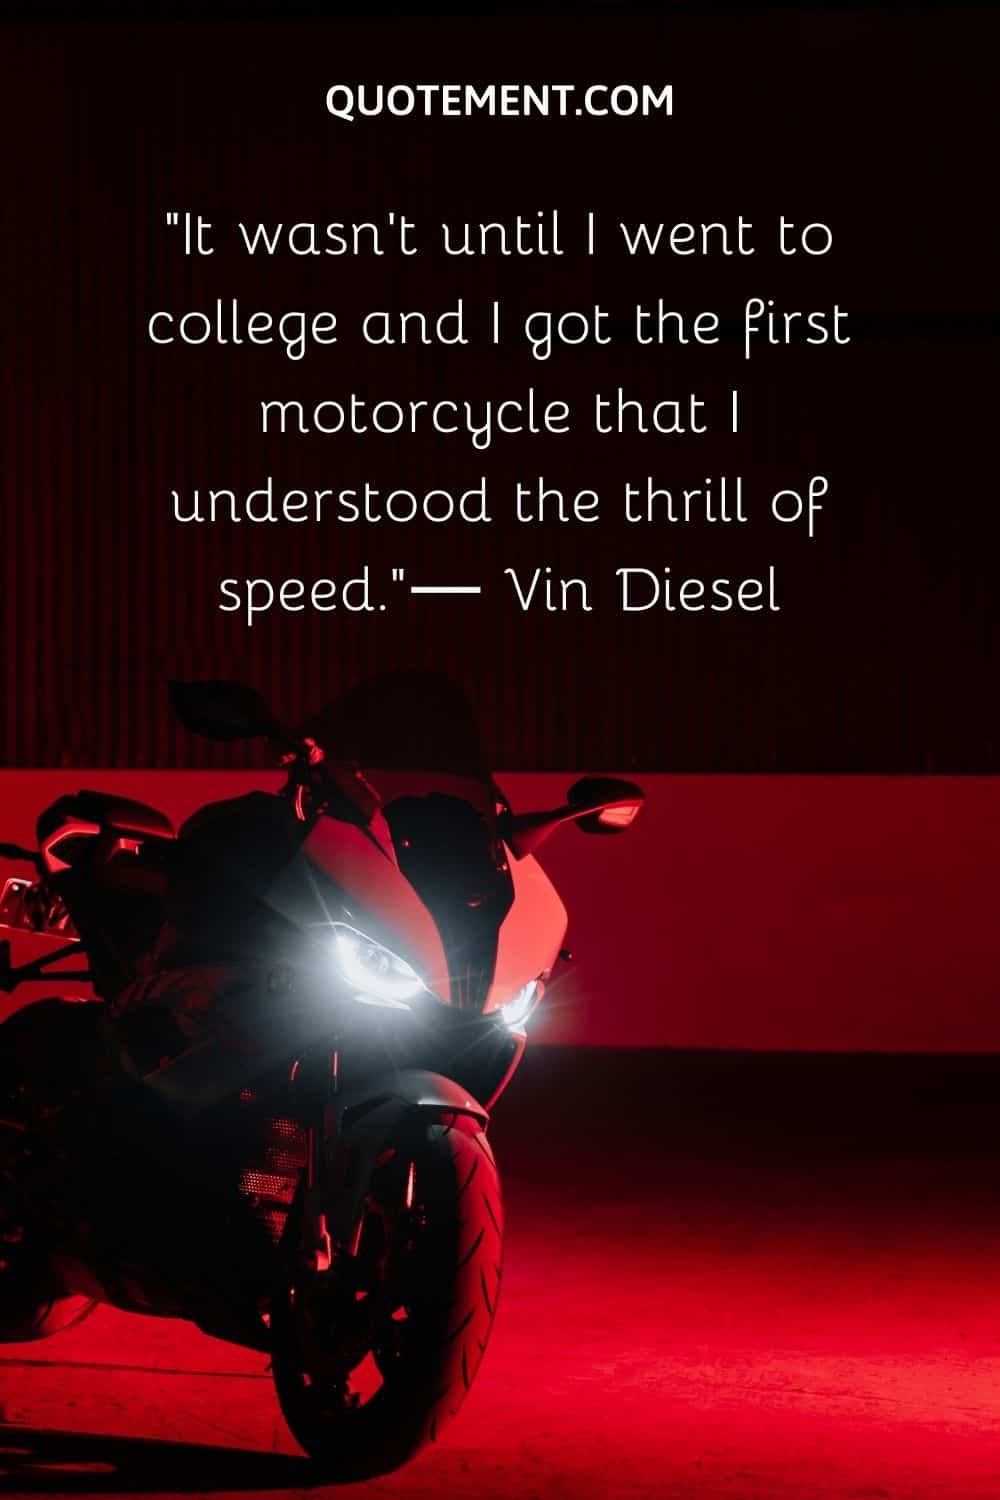 It wasn’t until I went to college and I got the first motorcycle that I understood the thrill of speed